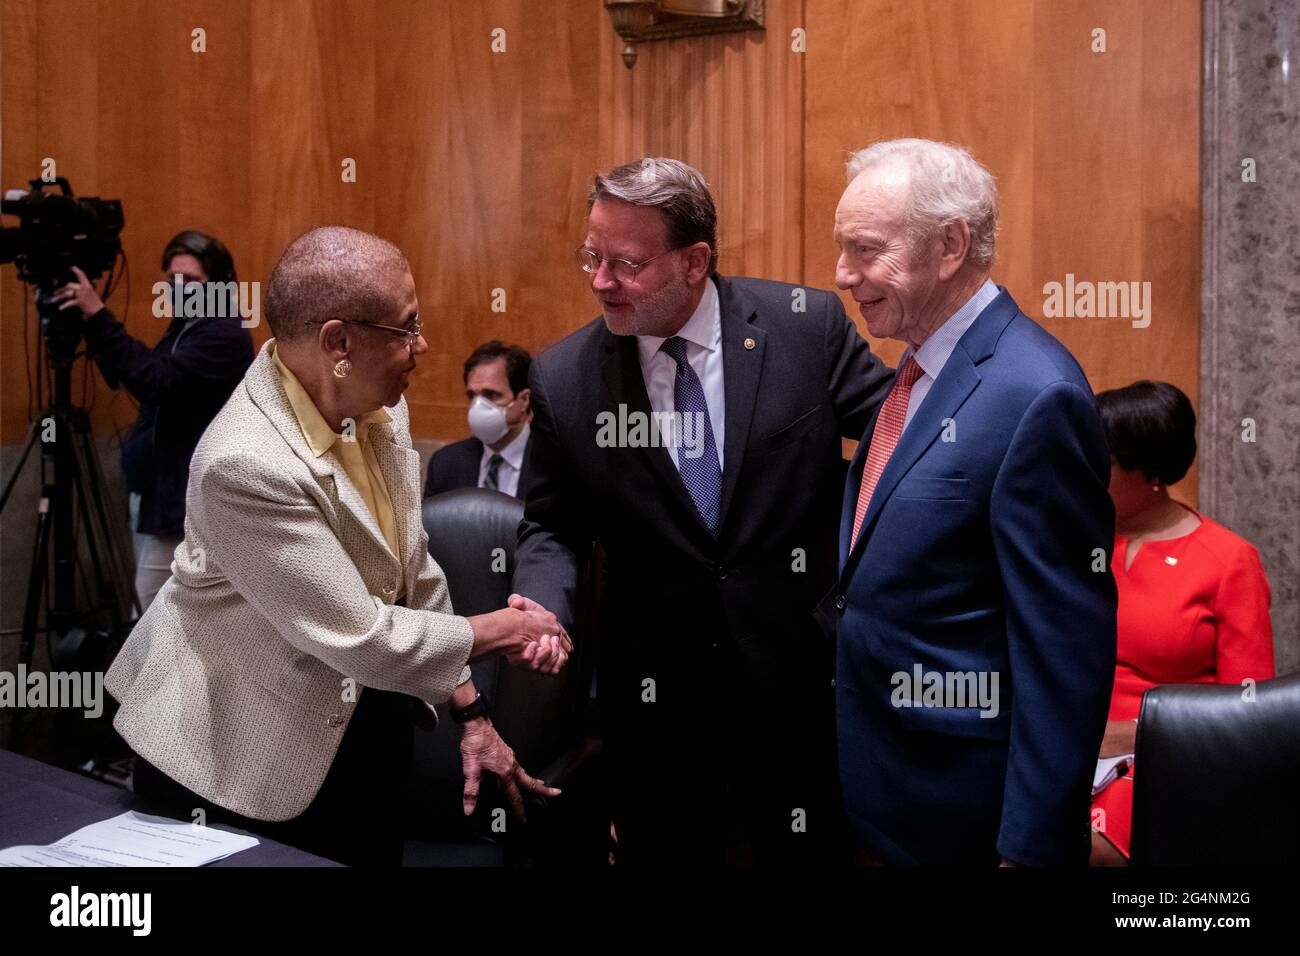 Former United States Senator Joseph I. Lieberman (Independent of Connecticut), right, and Delegate Eleanor Holmes Norton (Democrat of the District of Columbia), left, are greeted by United States Senator Gary Peters (Democrat of Michigan), Chairman, US Senate Committee on Homeland Security and Government Affairs, center, as they arrive for a Senate Committee on Homeland Security and Governmental Affairs hearing to examine D.C. statehood, in the Dirksen Senate Office Building in Washington, DC, Tuesday, June 22, 2021. Credit: Rod Lamkey/CNP /MediaPunch Stock Photo